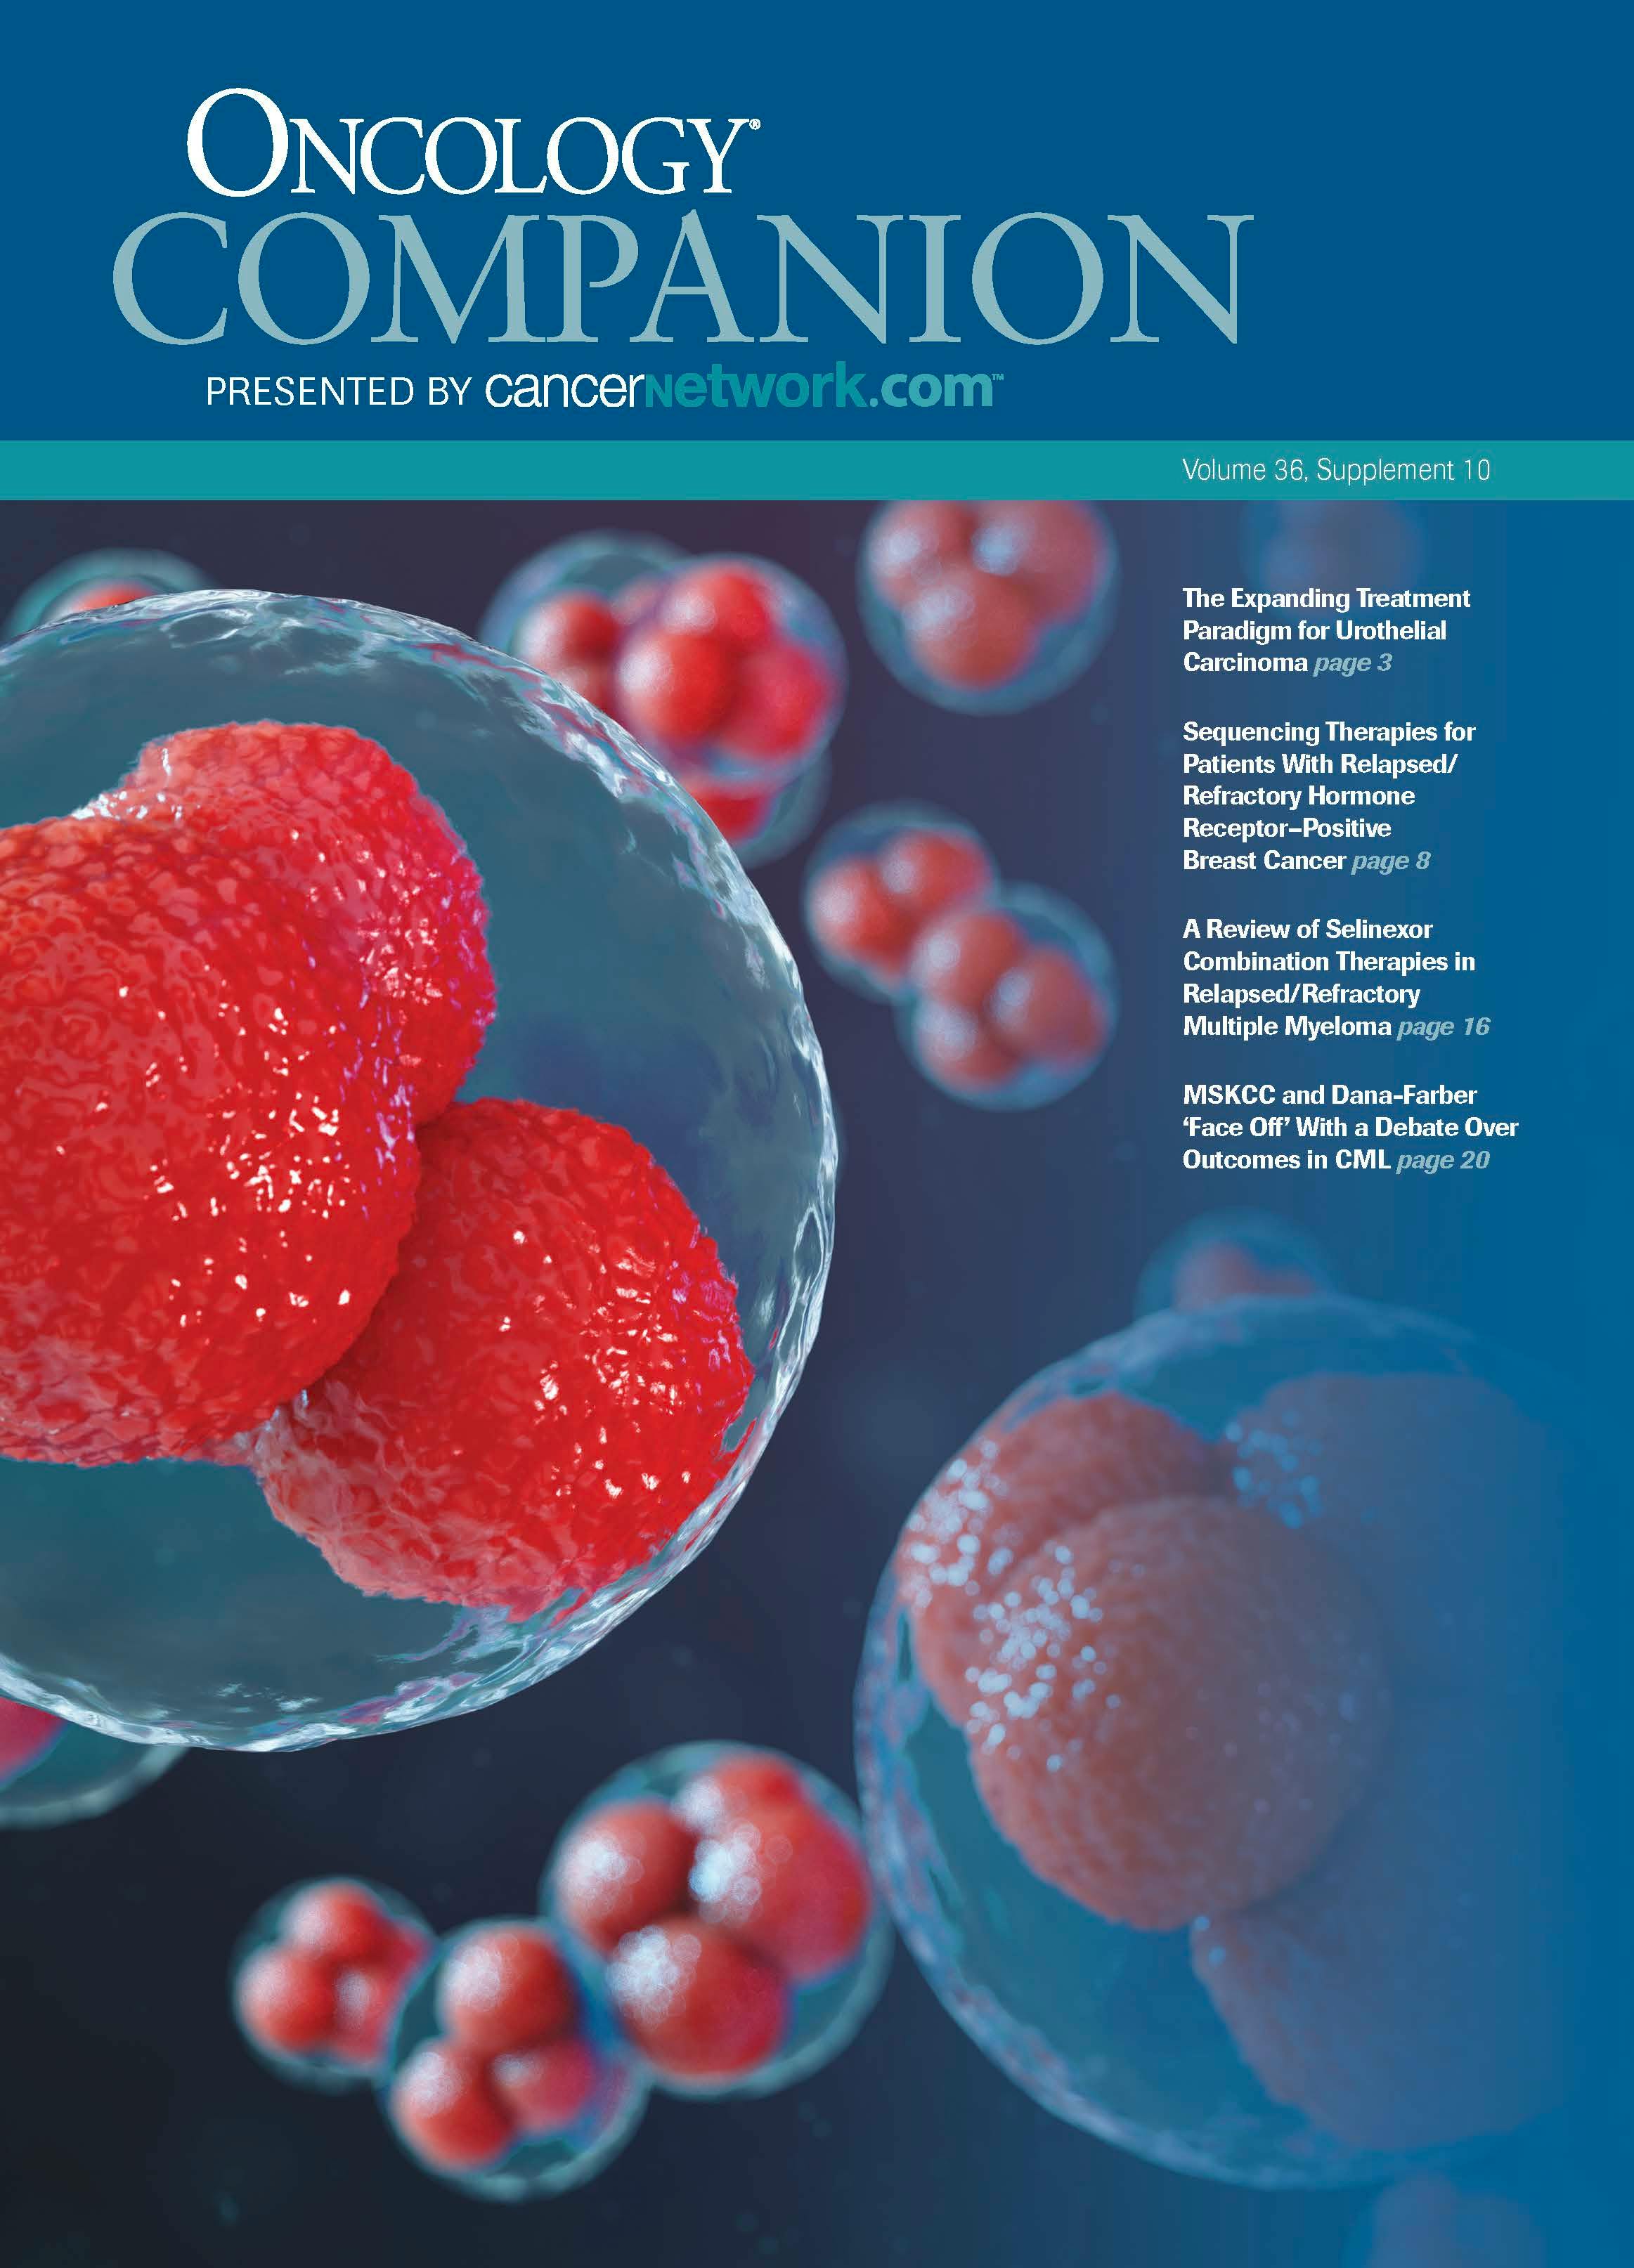 ONCOLOGY® Companion, Volume 36, Supplement 10